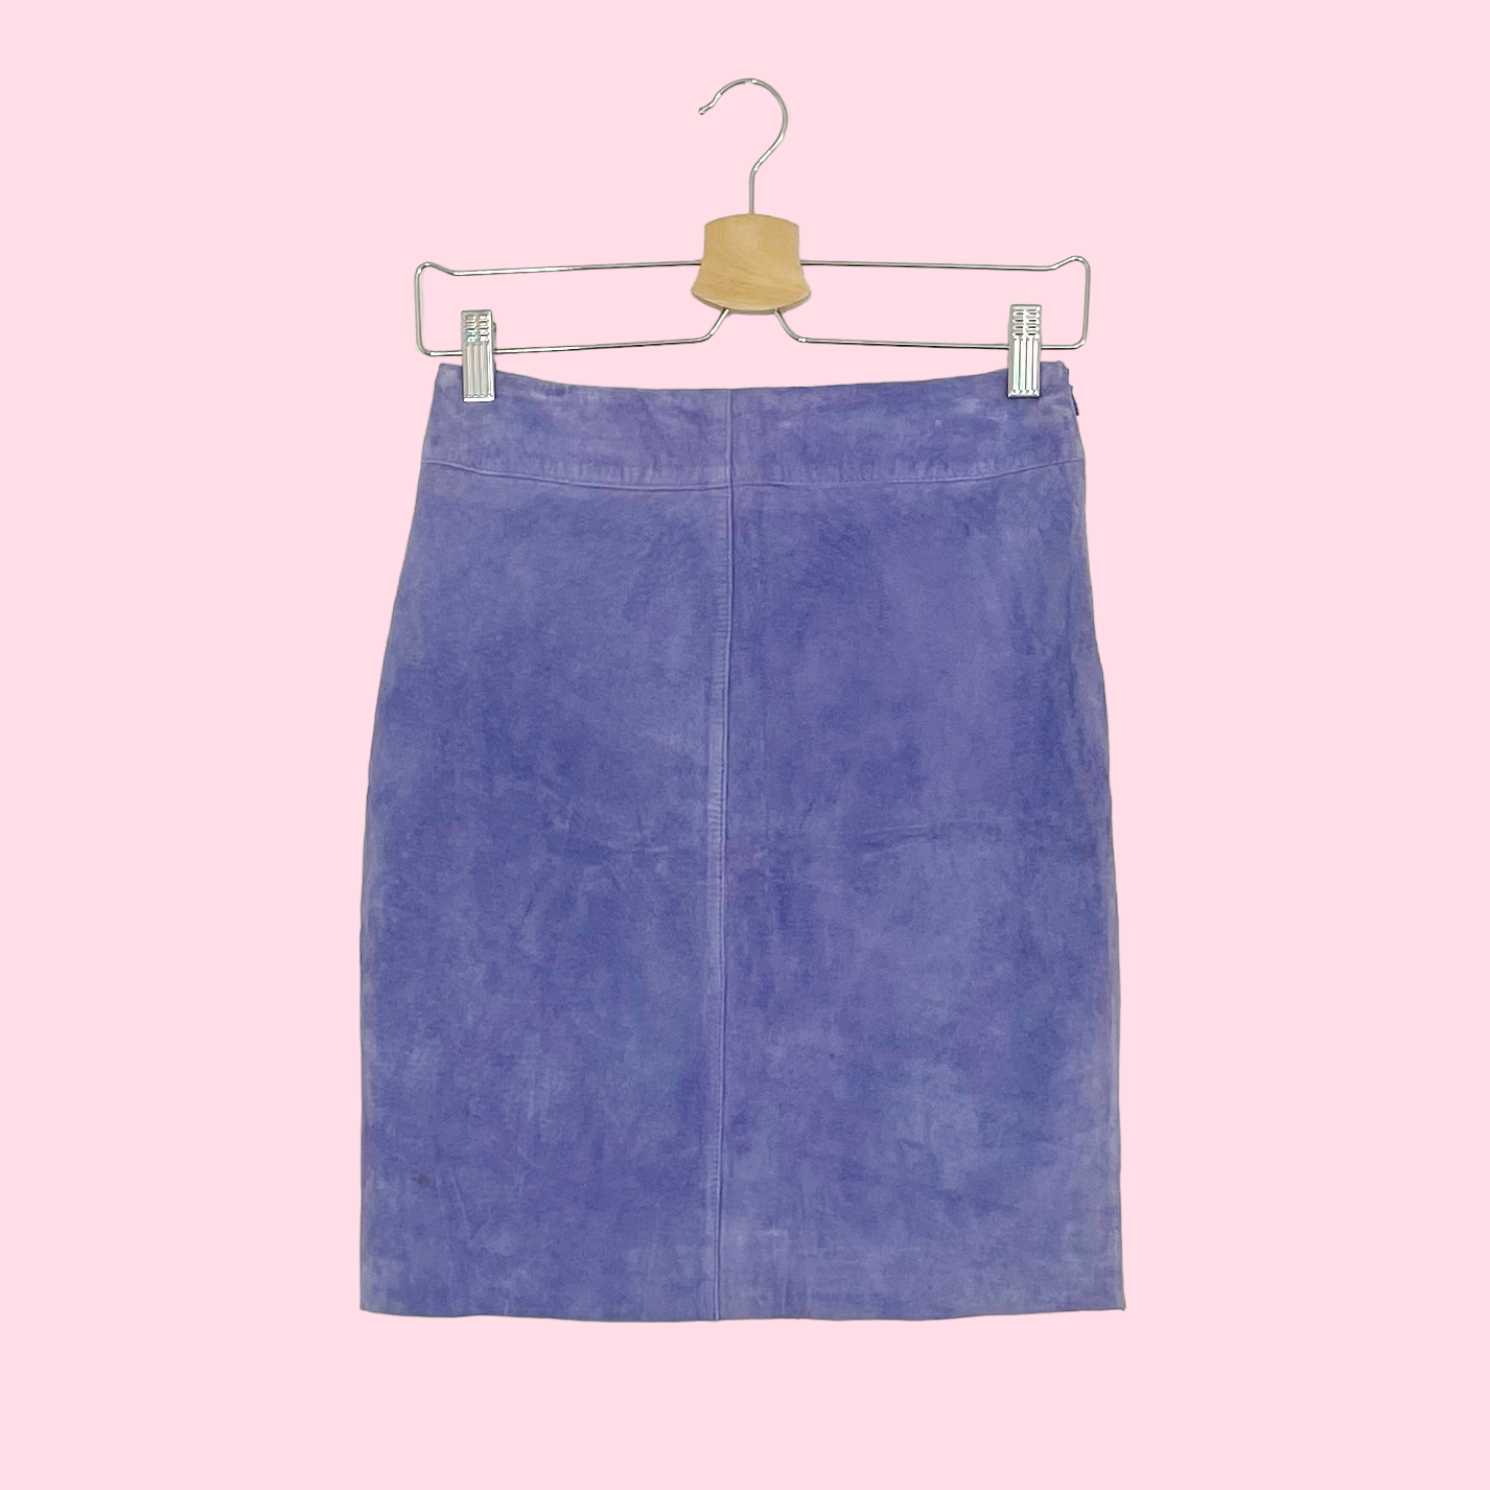 LAVENDER SUEDE HIGH WAISTED SKIRT (XS)